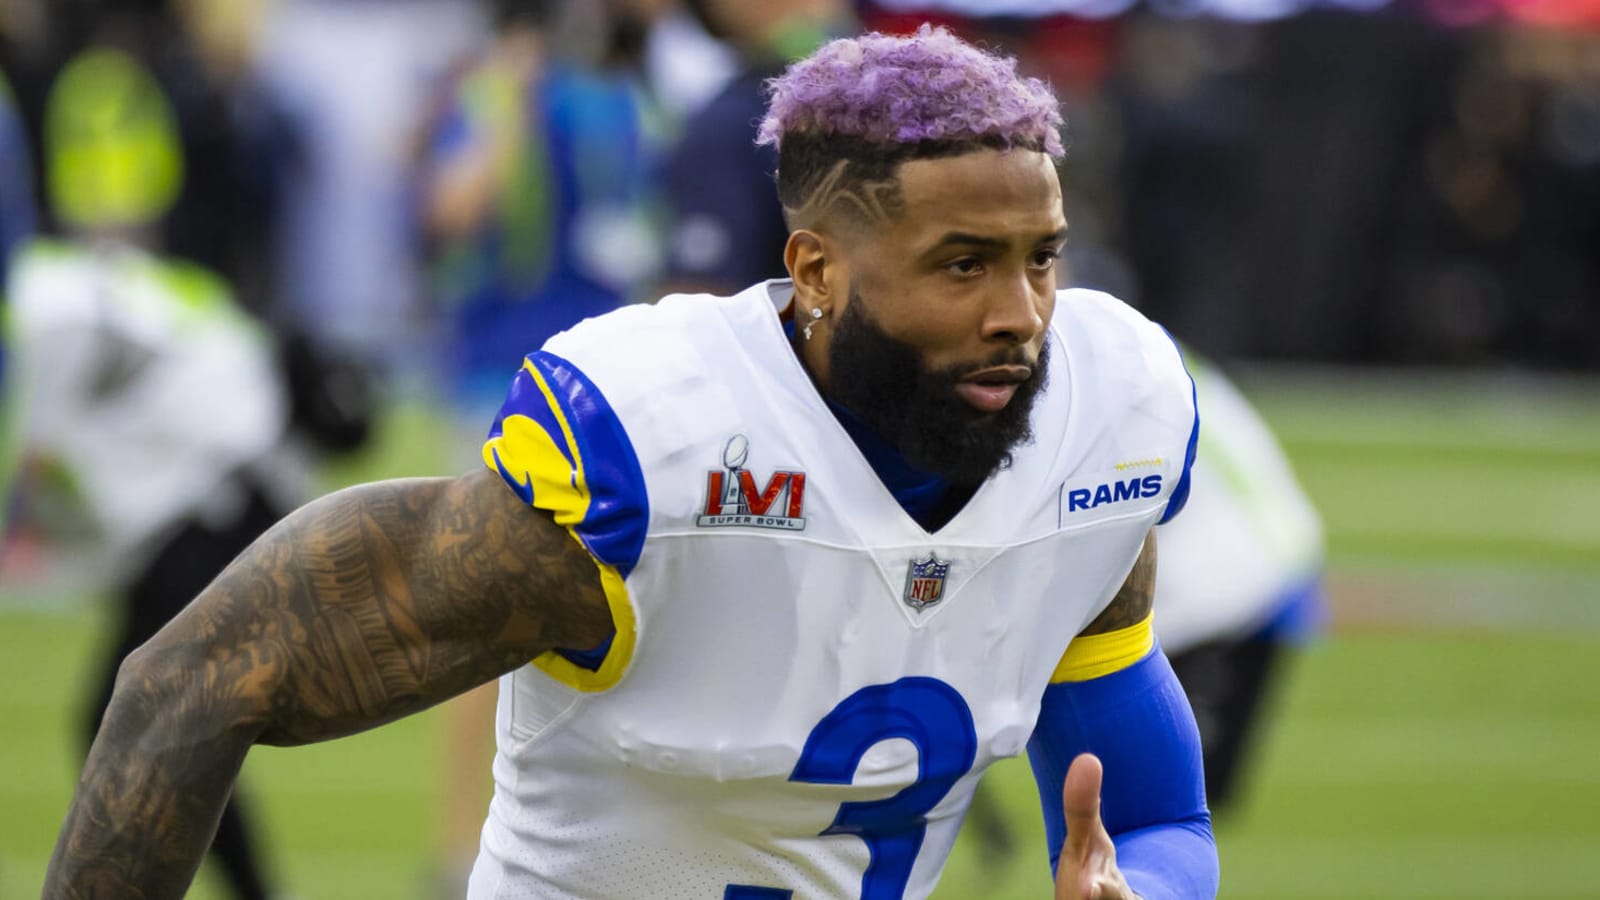 Will there be an Odell Beckham Jr. reunion in Cleveland?